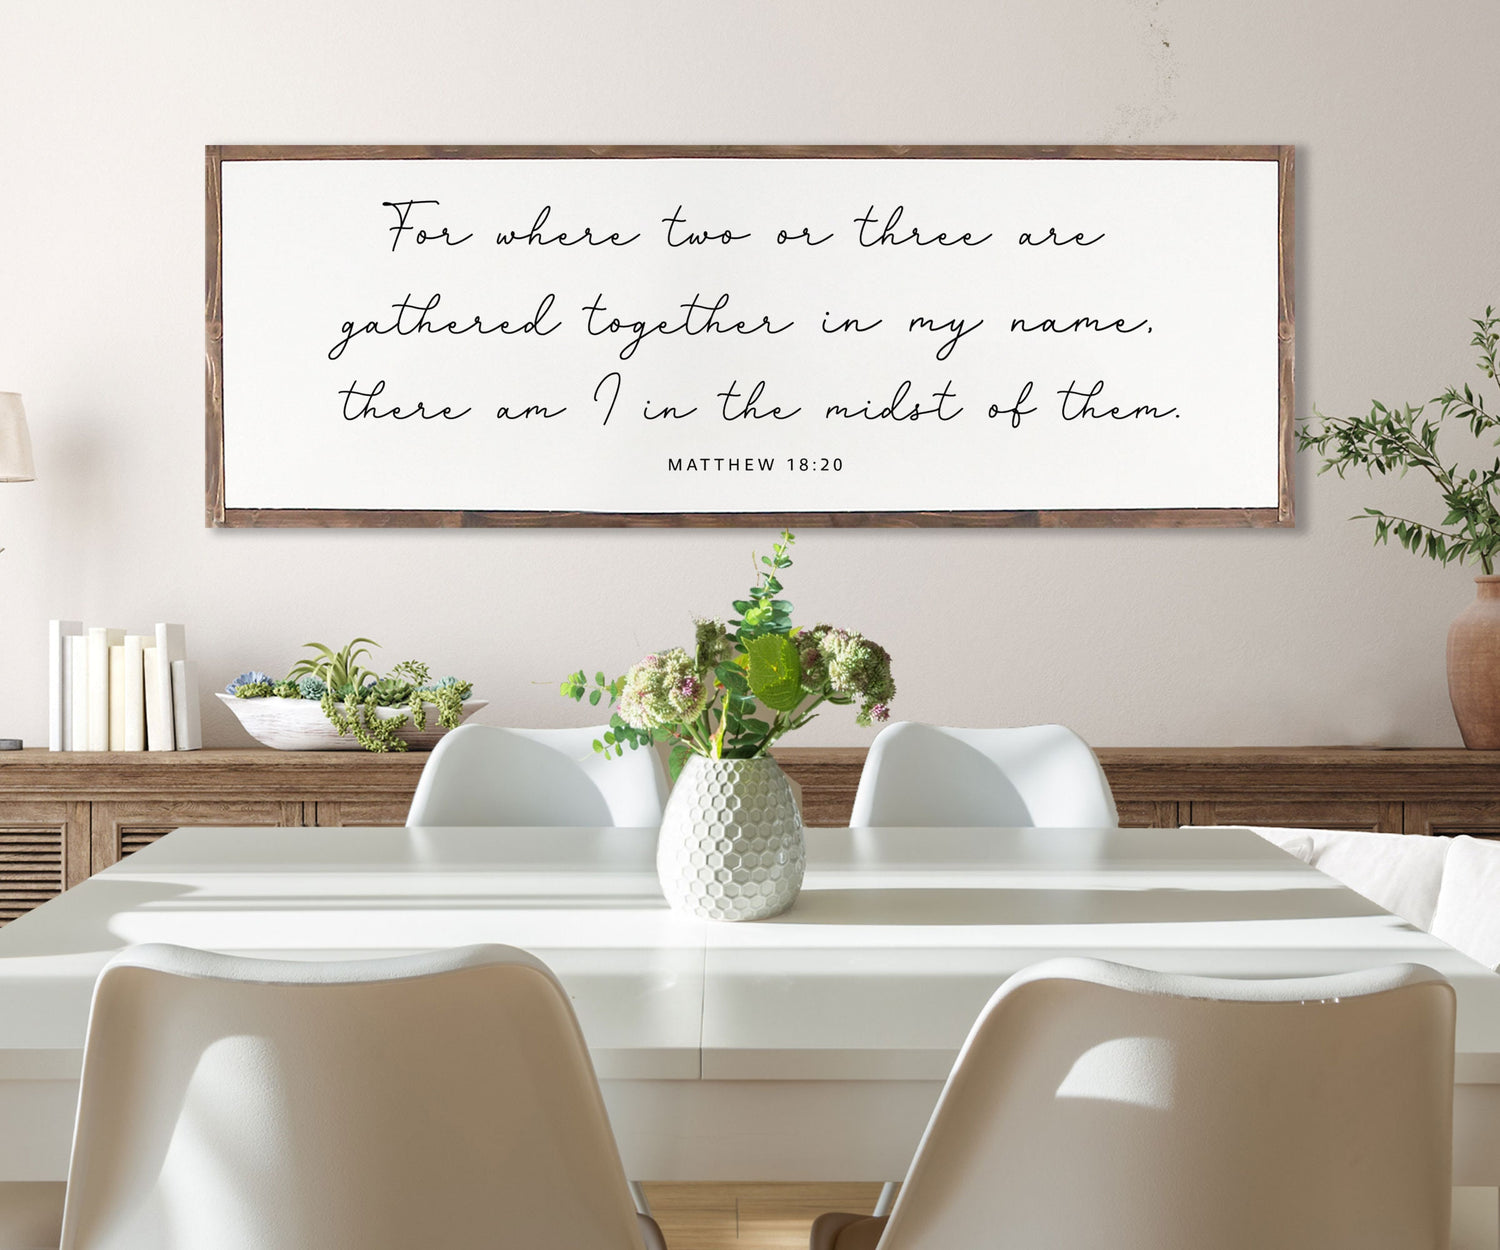 For Where Two or Three Are Gathered Together In My Name, There am I | Dining Room Wood Sign Farmhouse | Christian home decor | Matthew 18:20